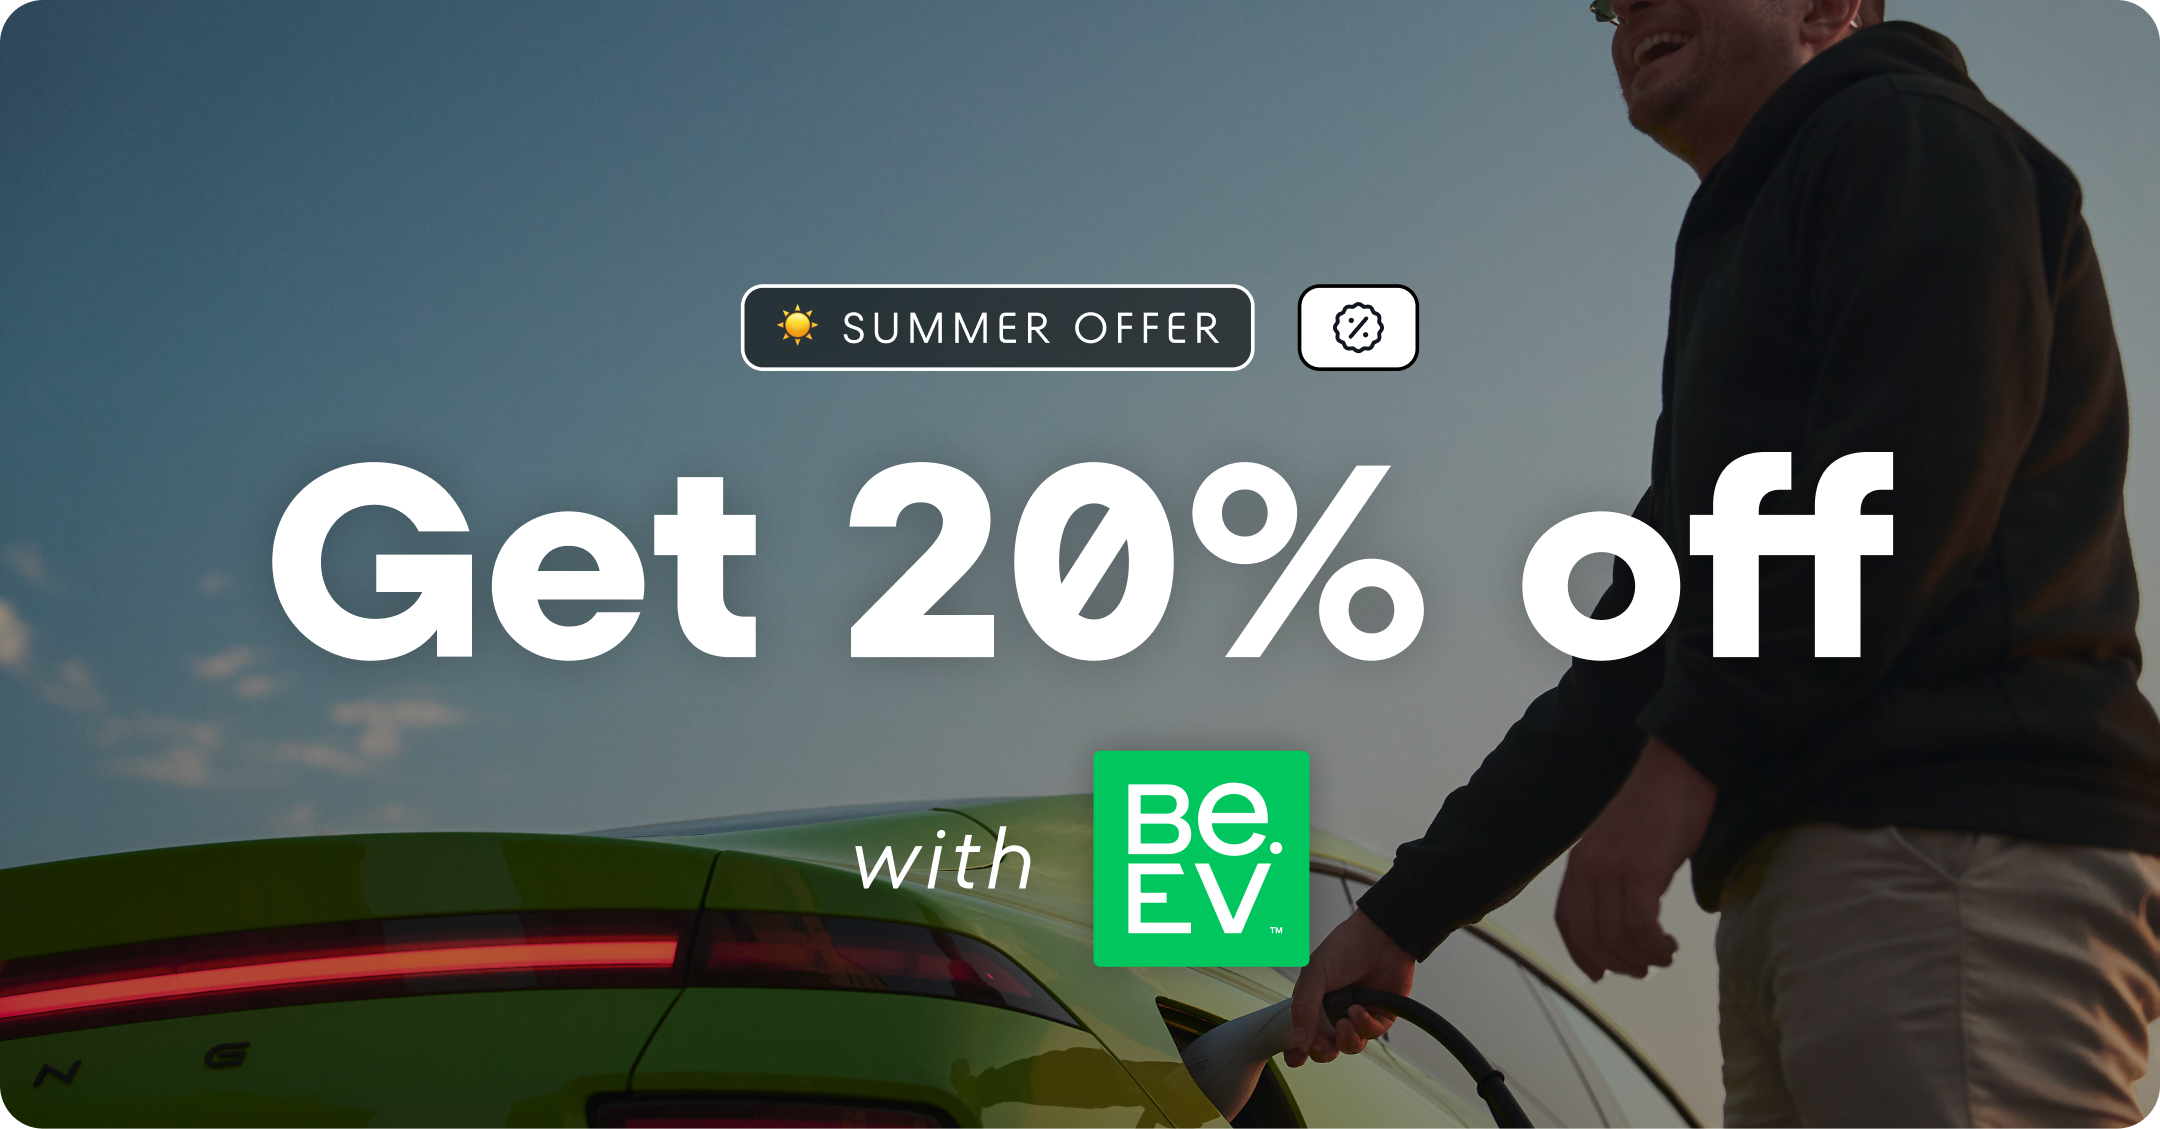 Save 20% on your next road trip with Be.EV